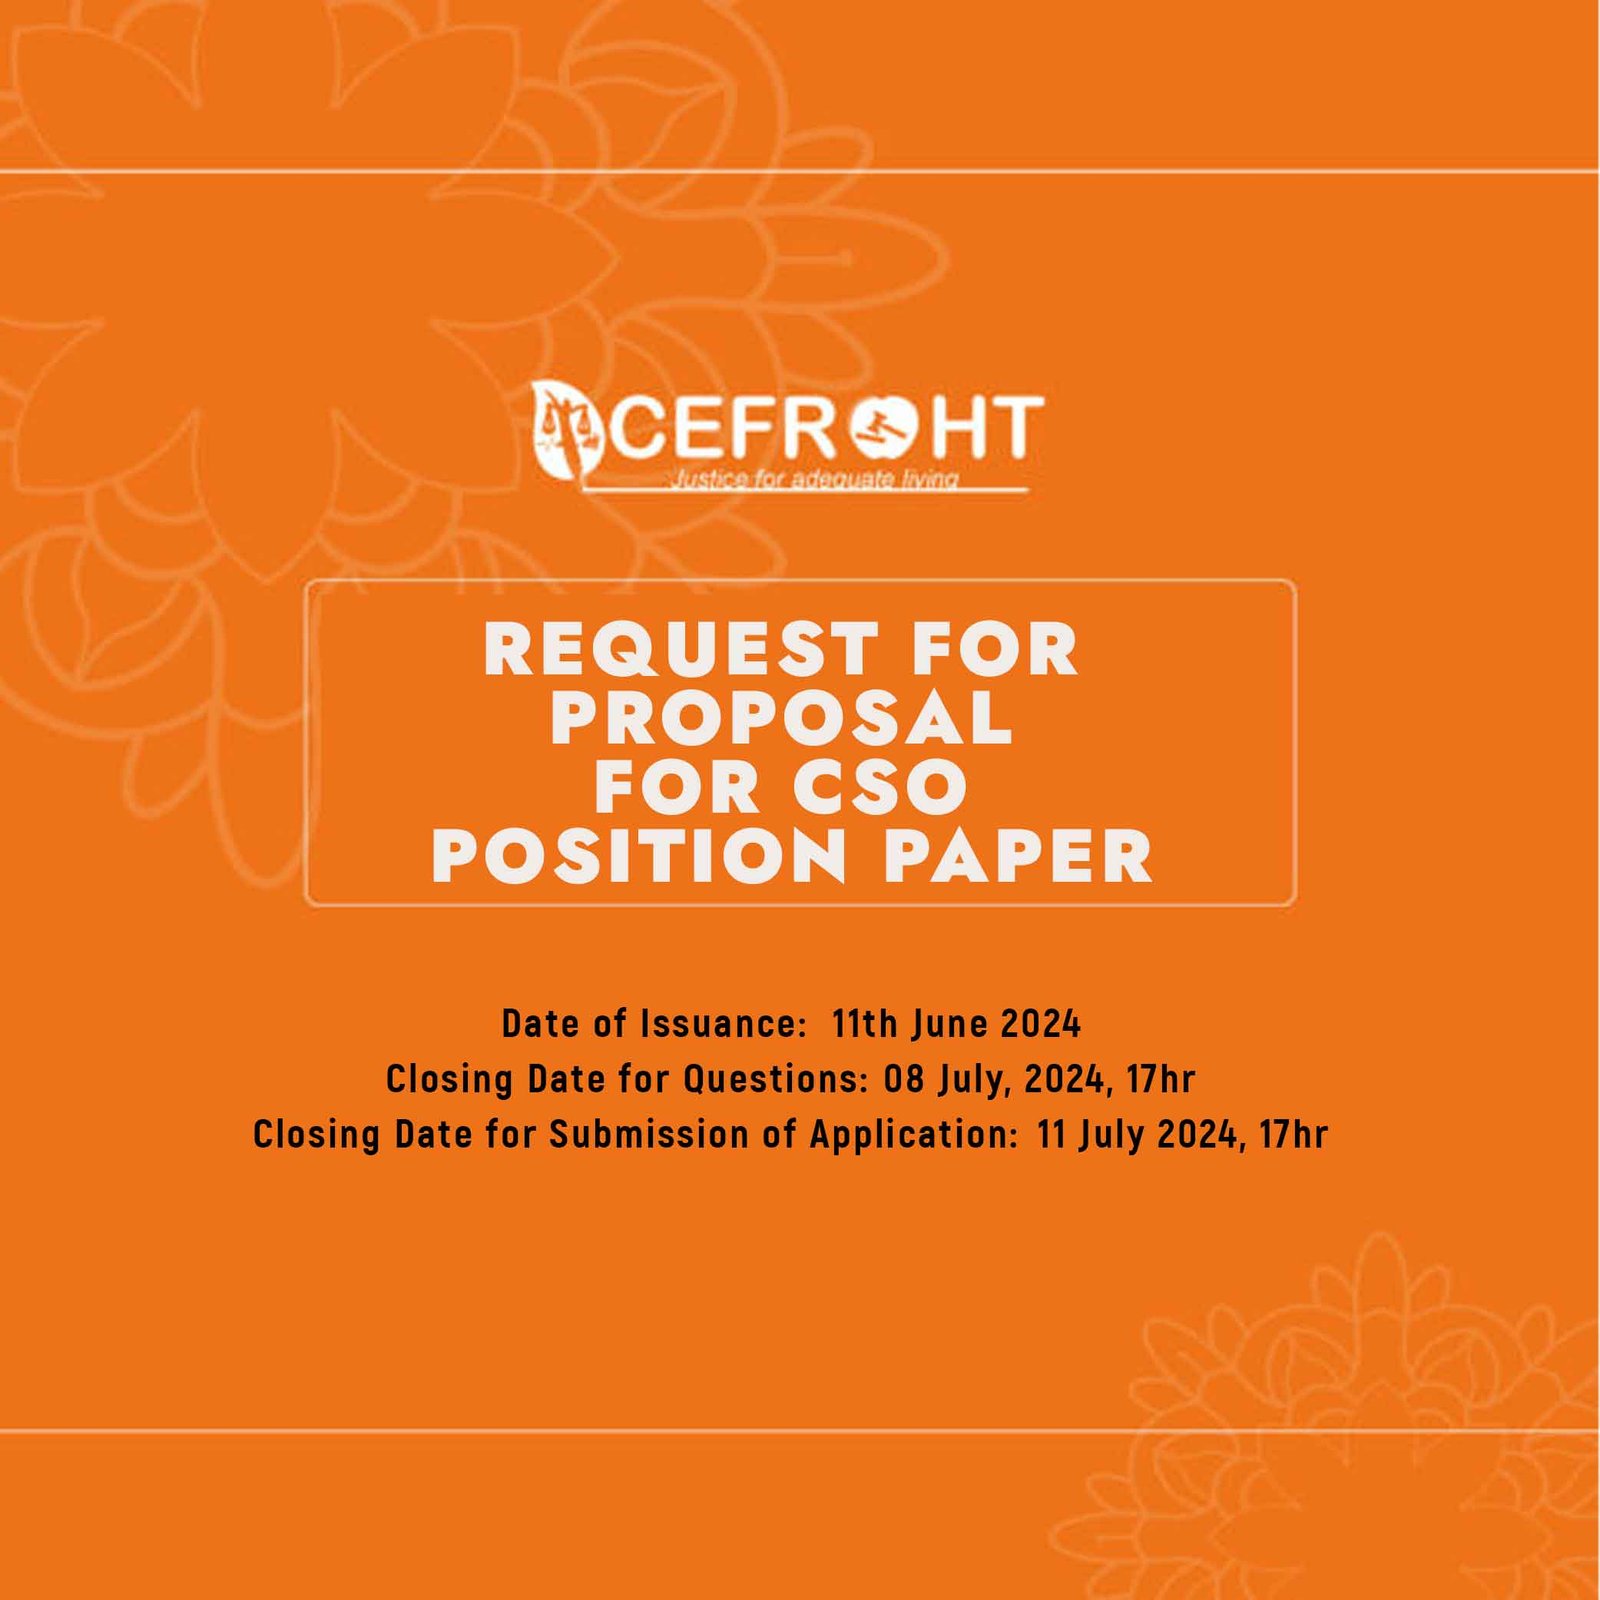 REQUEST FOR PROPOSAL FOR CSO POSITION PAPER